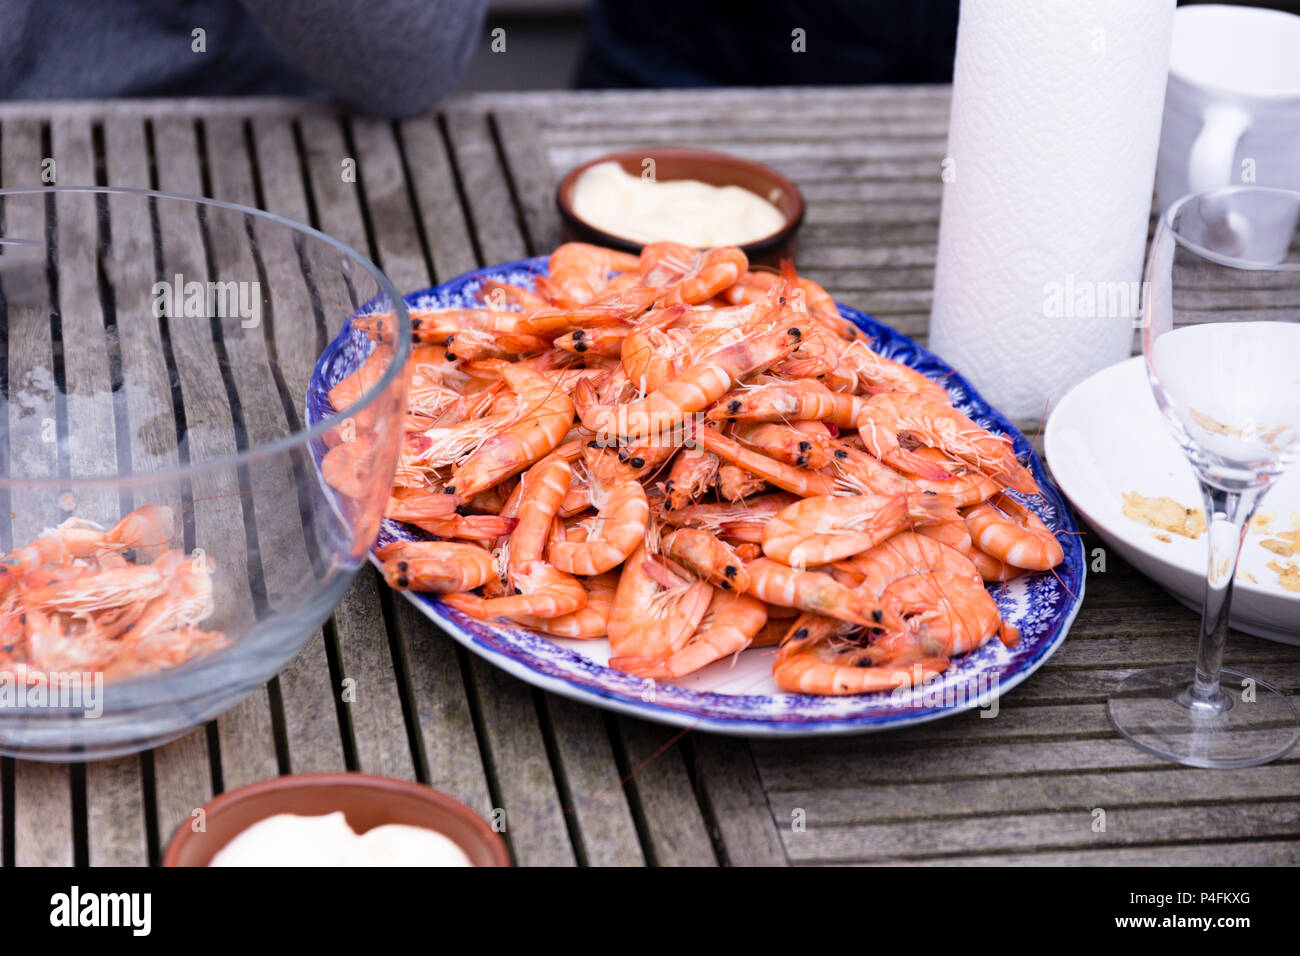 Friends sharing a plate of prawns at a social gathering outside Stock Photo